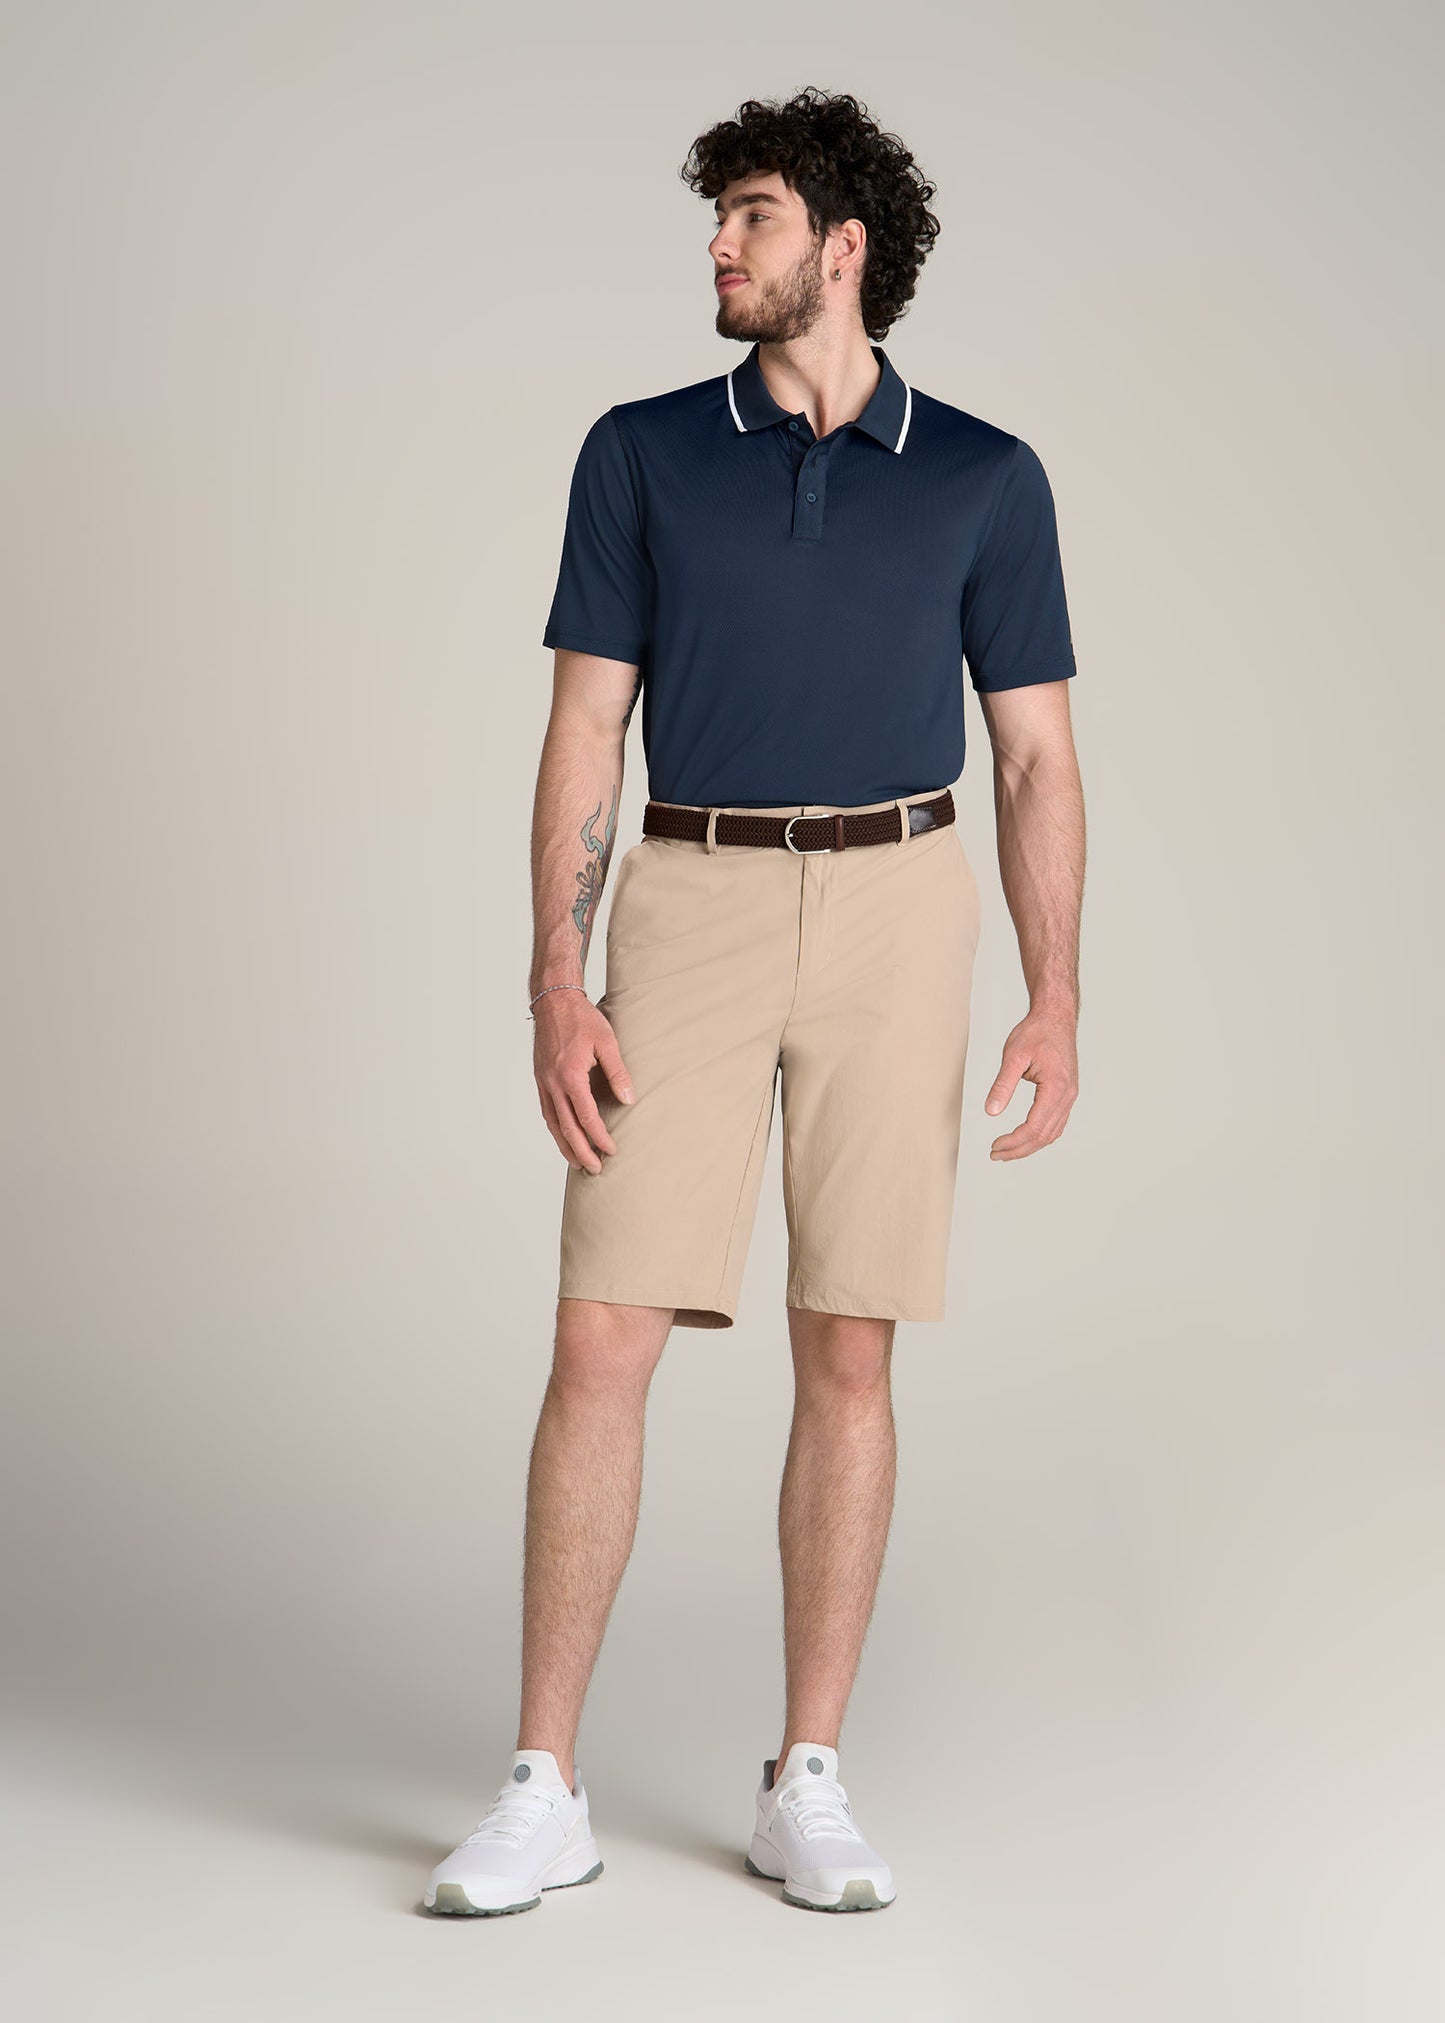 American-Tall-Men-AT-Performance-Tipped-Golf-Polo-Bright-Navy-full